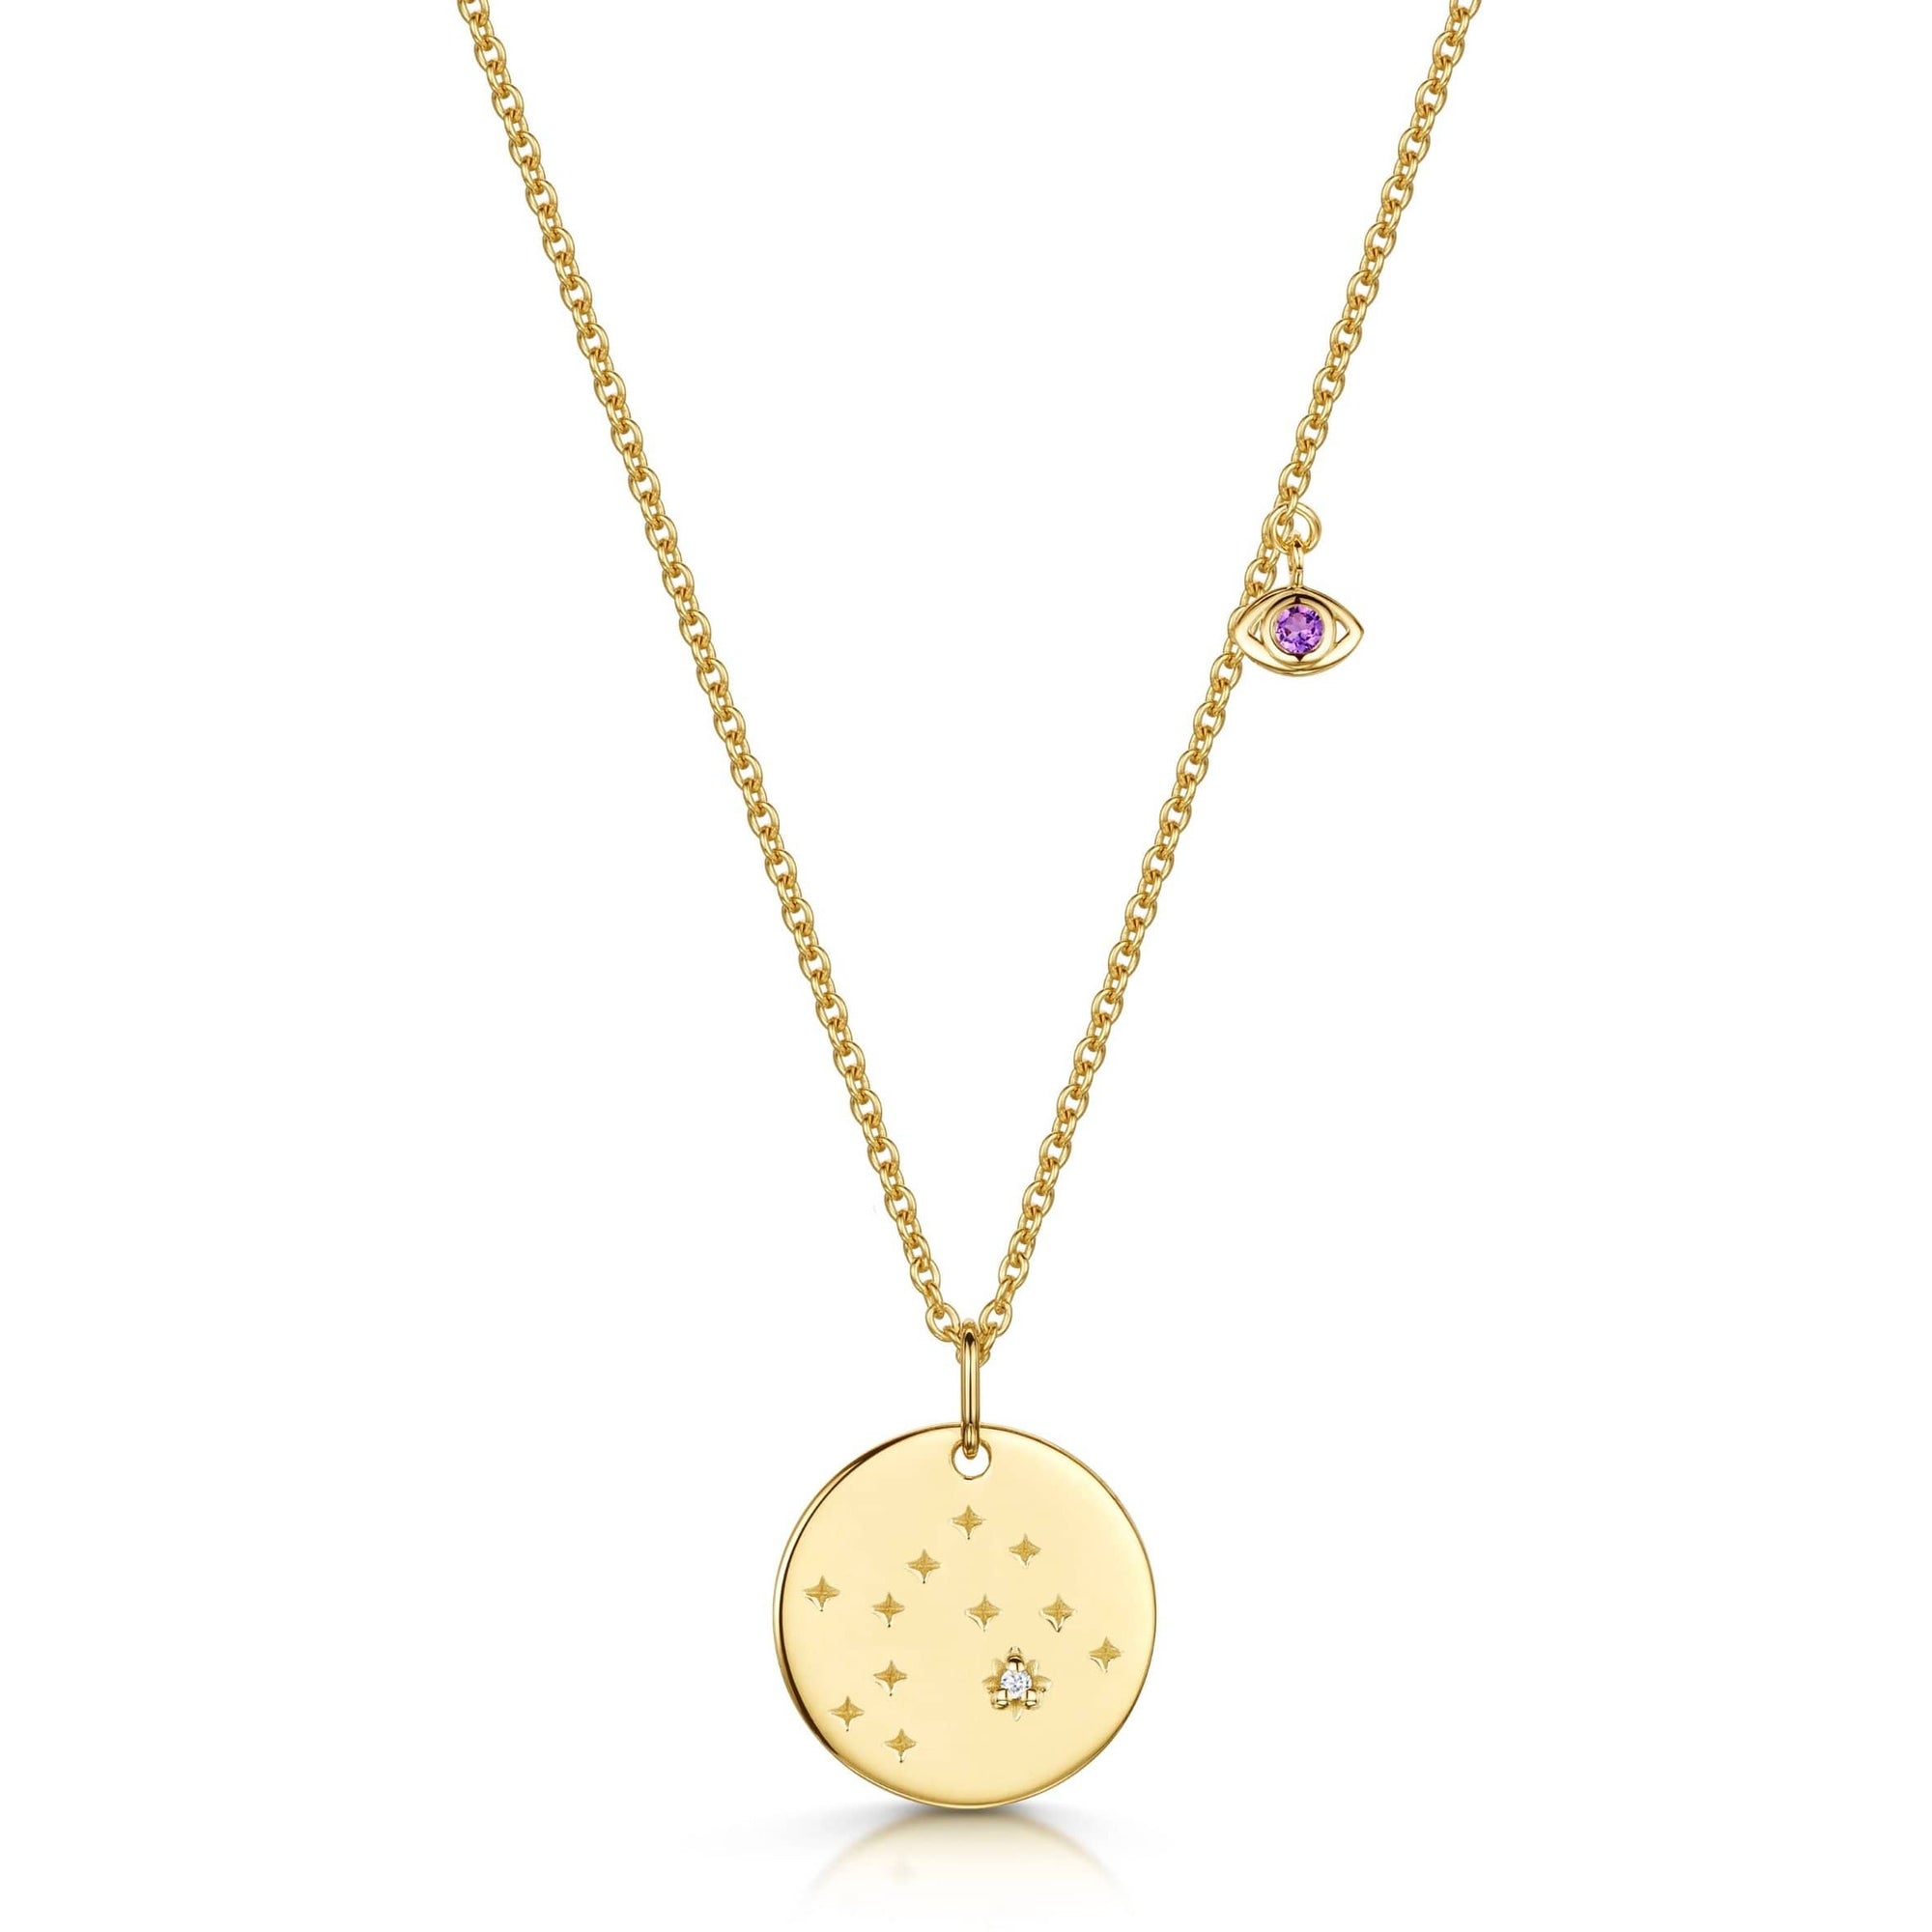 Fervor Montreal Necklace Aquarius Double-Sided Zodiac & Constellation Necklace